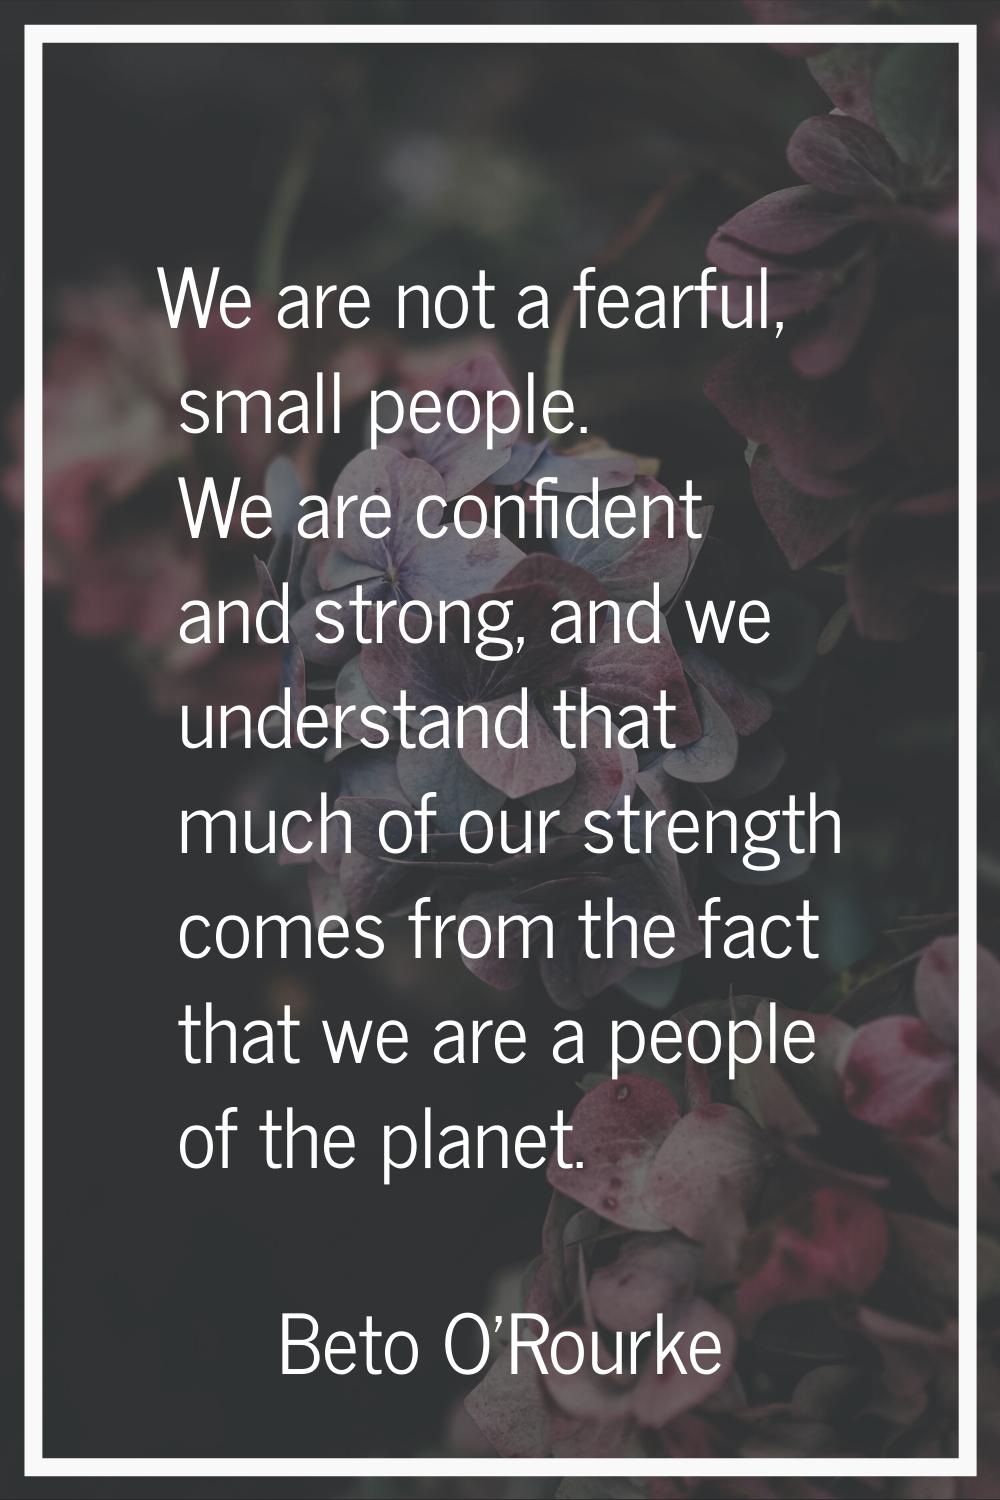 We are not a fearful, small people. We are confident and strong, and we understand that much of our